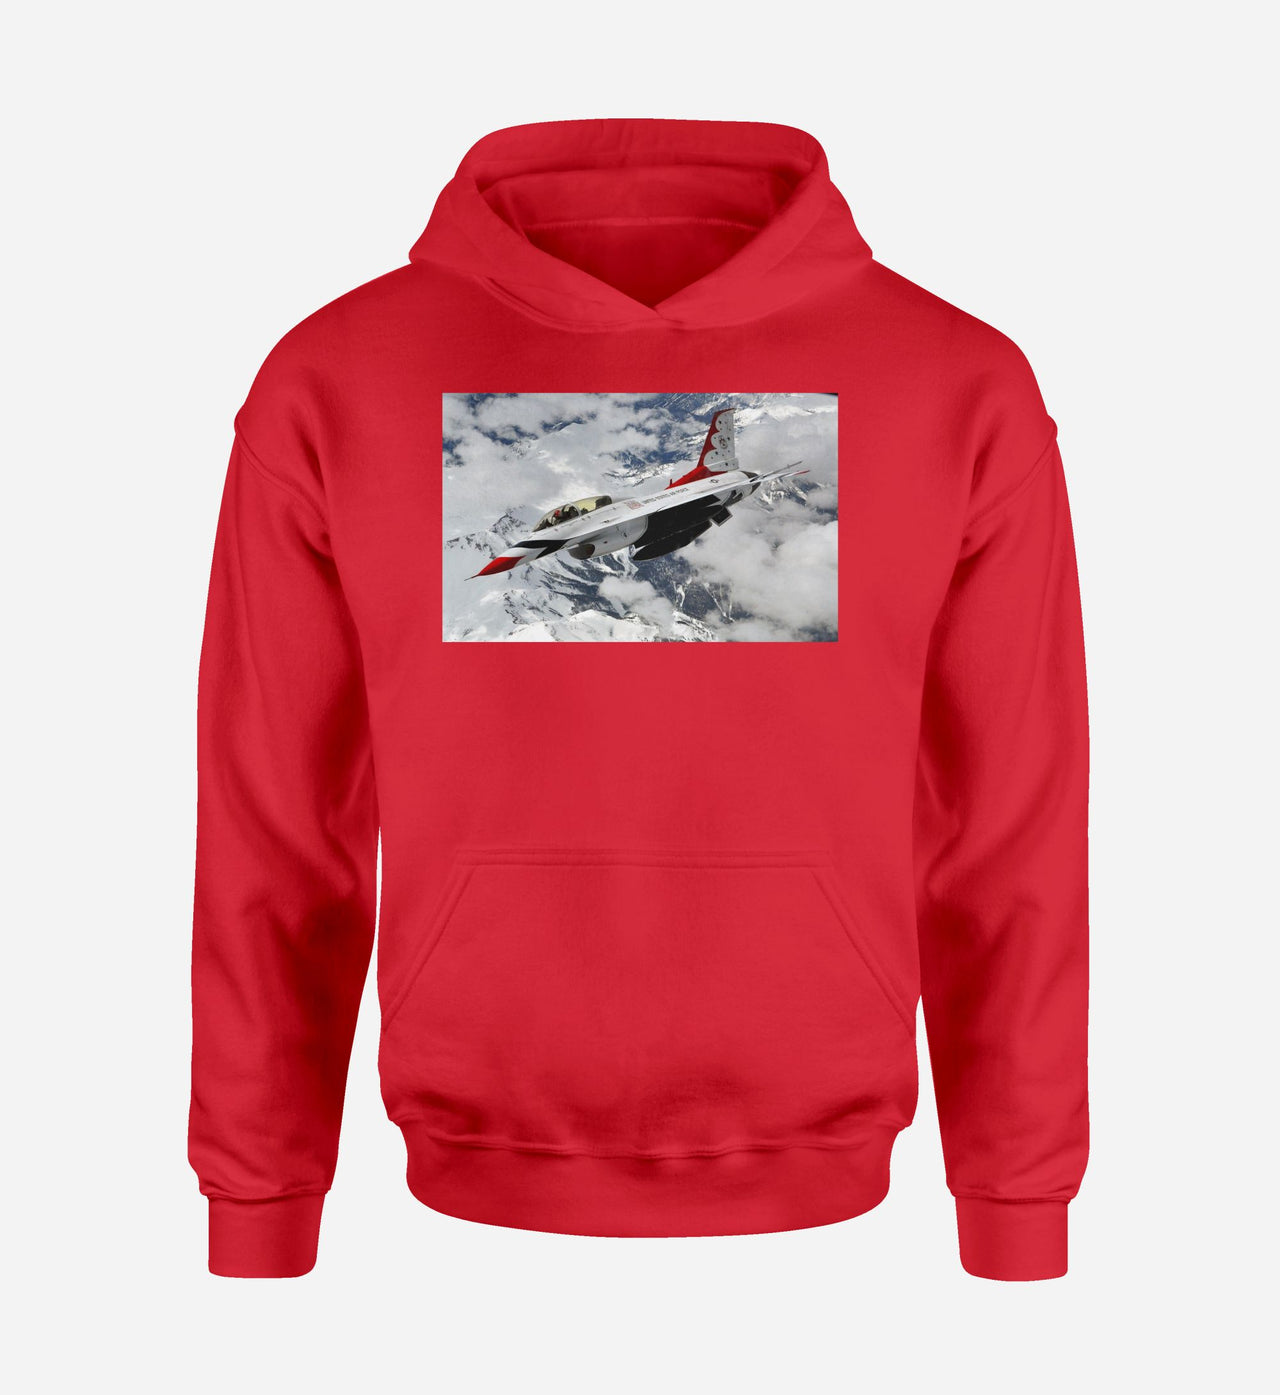 US Air Force Show Fighting Falcon F16 Designed Hoodies